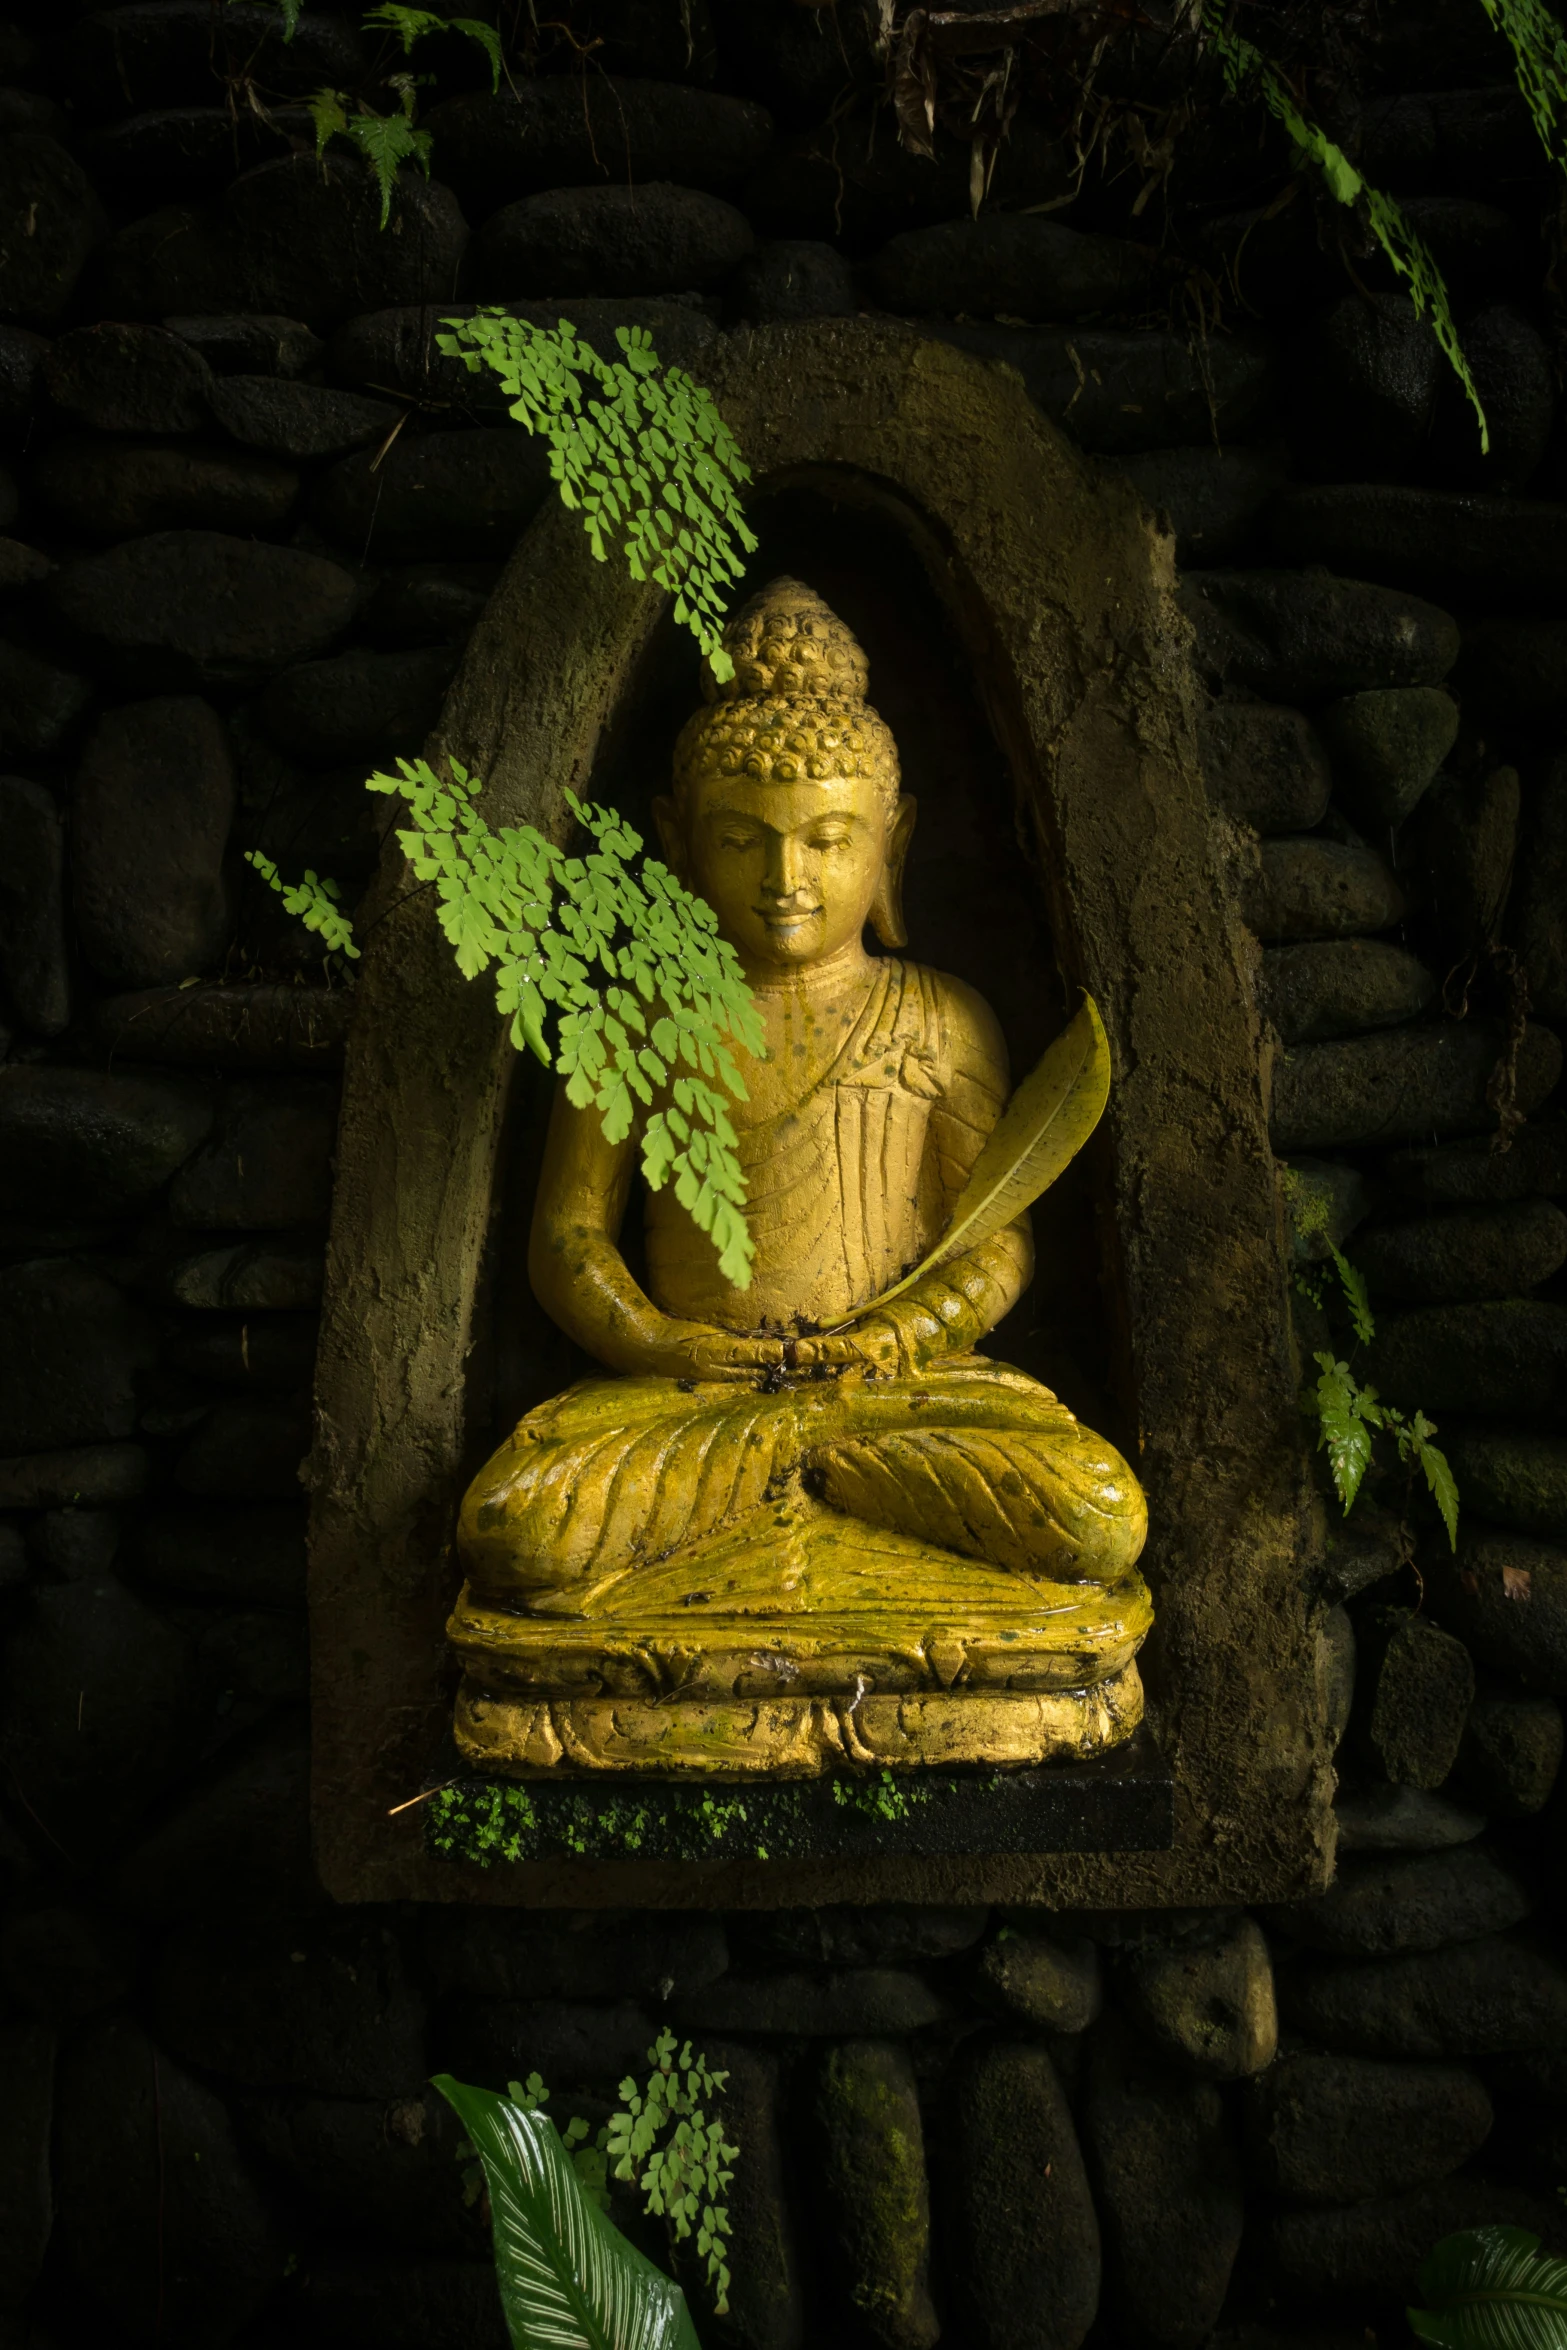 the buddha is made from stones and sits in a hole